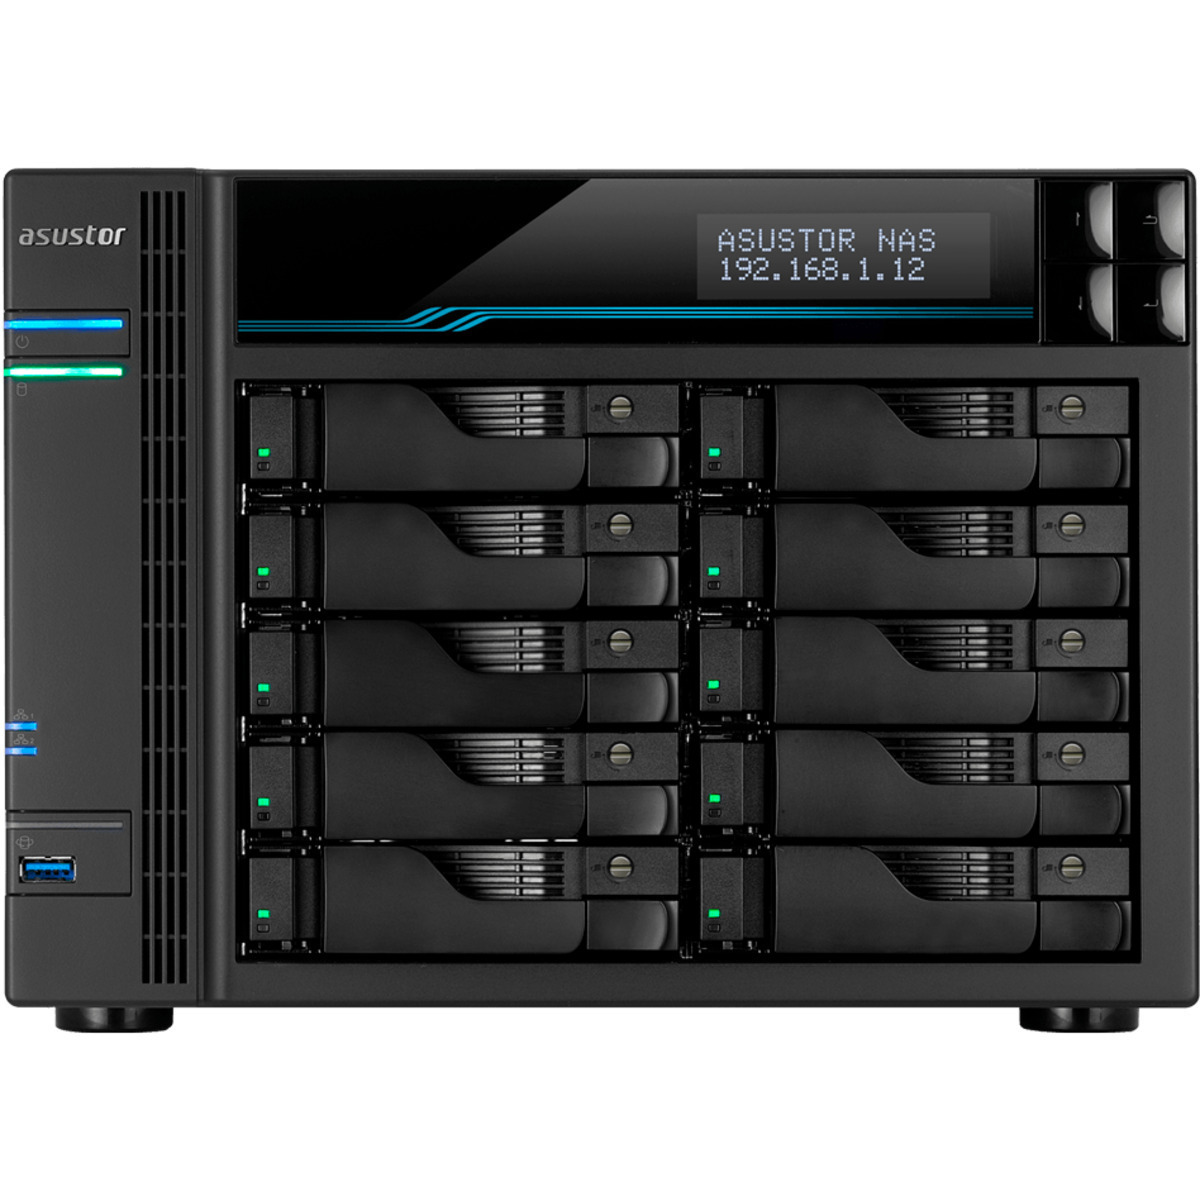 buy $3920 ASUSTOR AS7110T Lockerstor 10 Pro 10tb Desktop NAS - Network Attached Storage Device 10x1000gb Samsung 870 QVO MZ-77Q1T0 2.5 SATA 6Gb/s SSD CONSUMER Class Drives Installed - Burn-In Tested - nas headquarters buy network attached storage server device das new raid-5 free shipping usa AS7110T Lockerstor 10 Pro